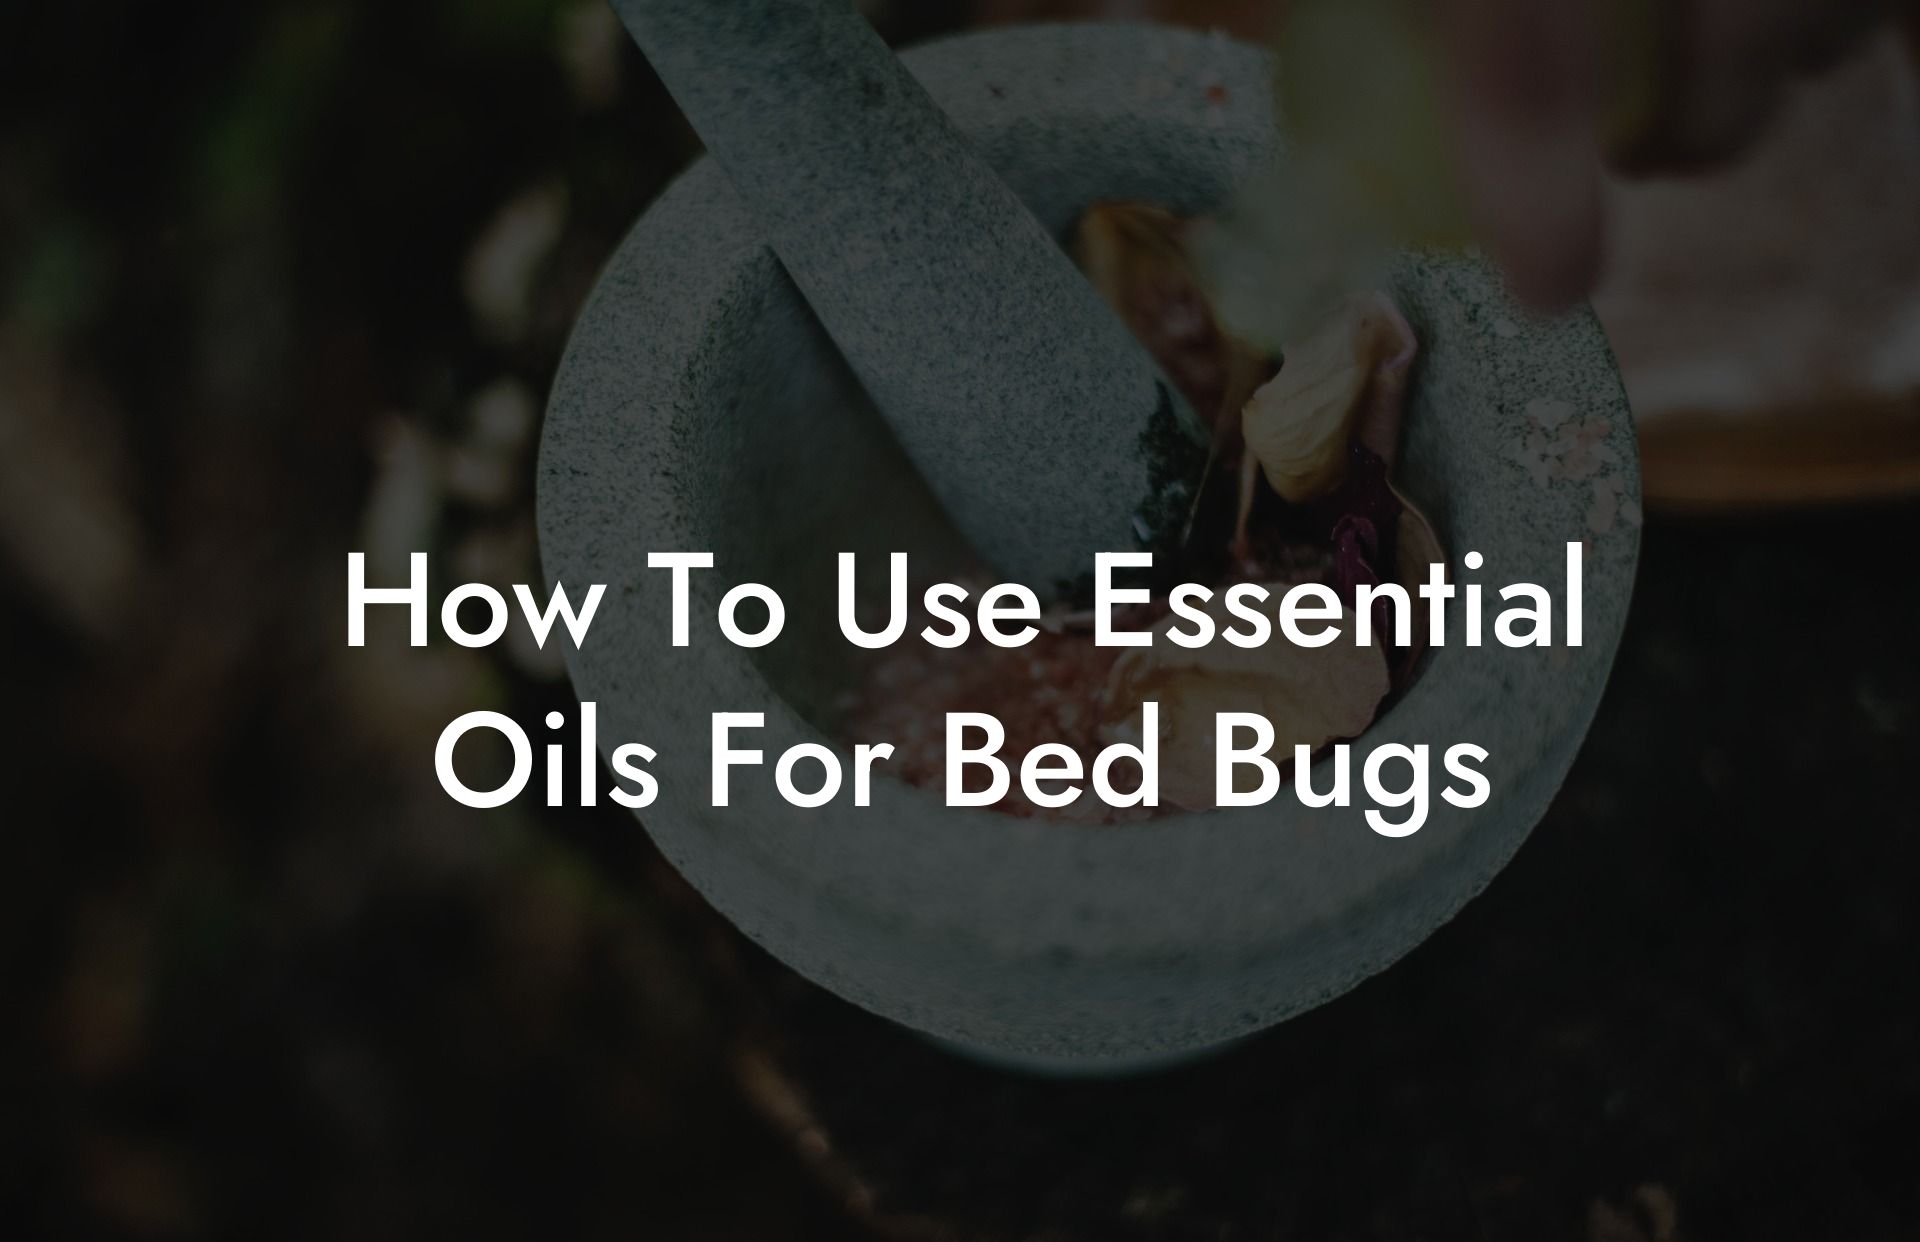 How To Use Essential Oils For Bed Bugs